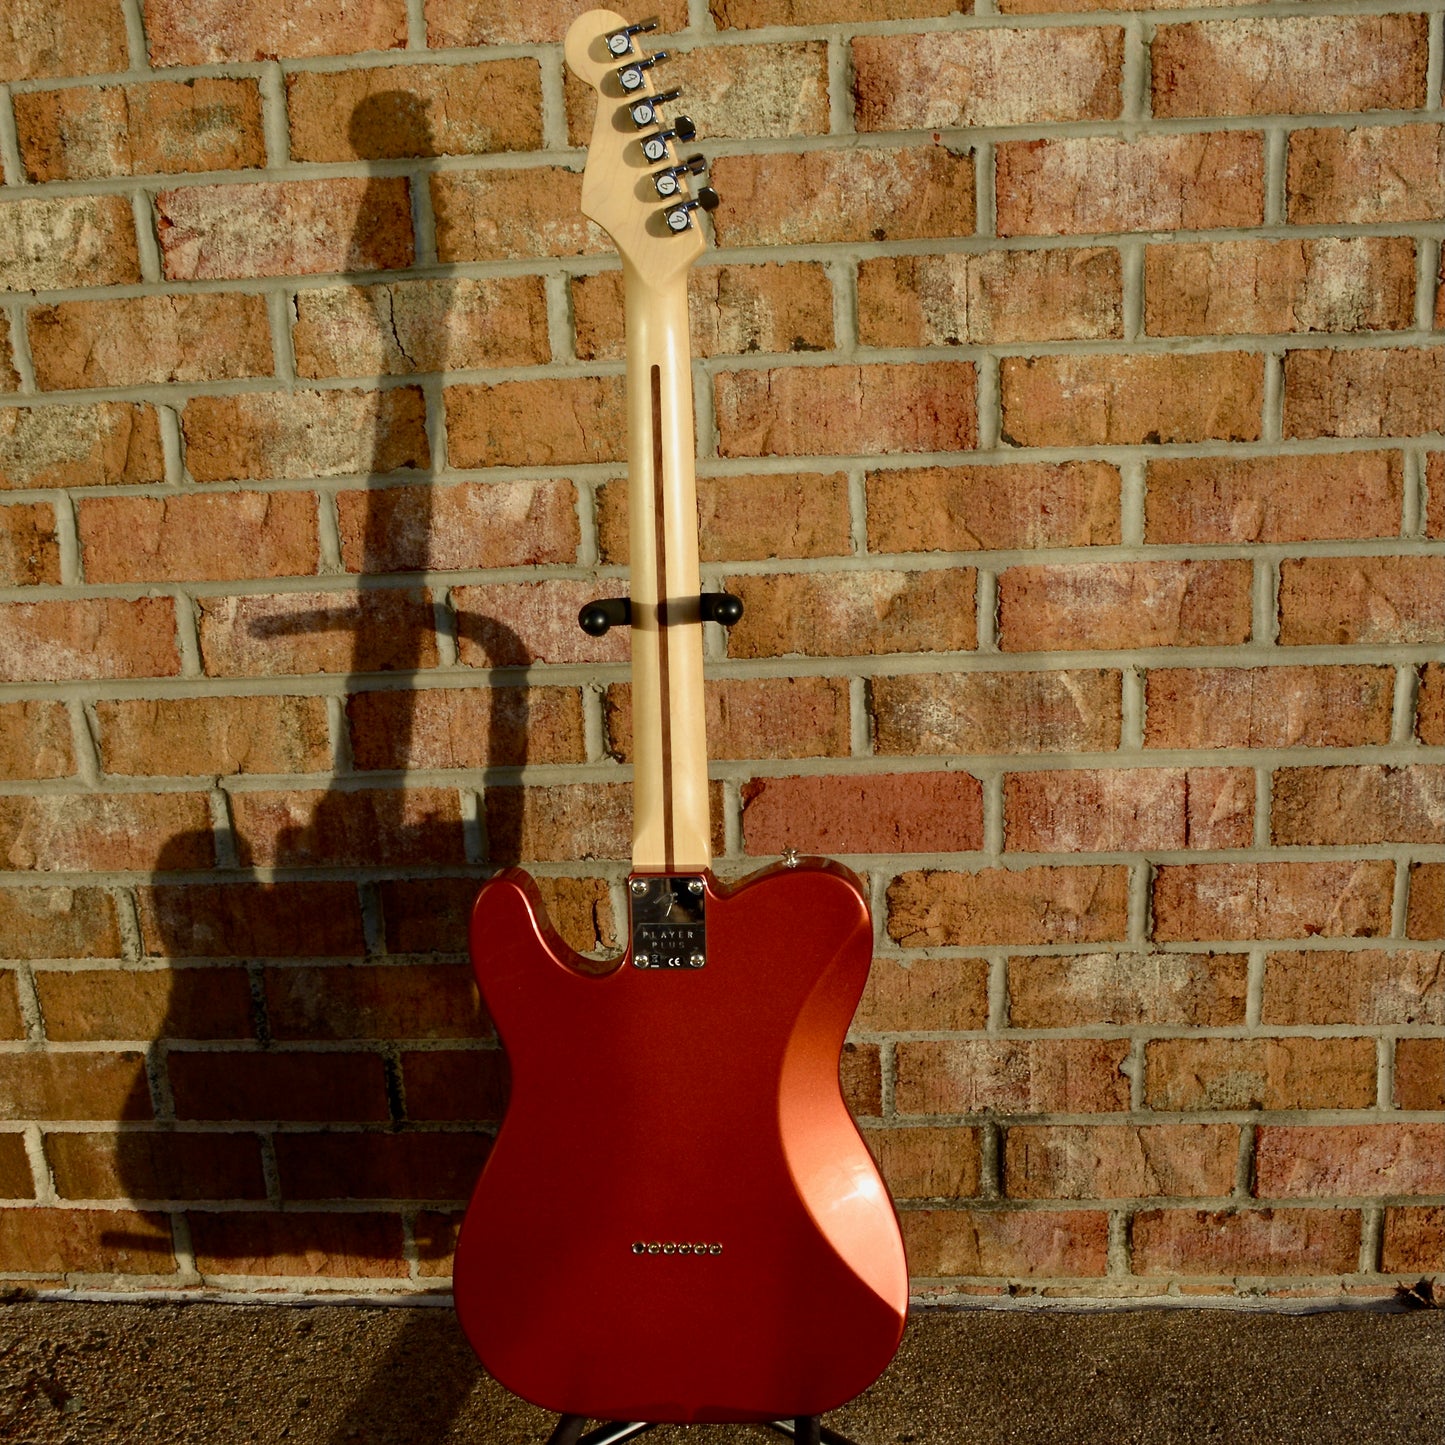 Fender Player Plus Nashville Telecaster® Aged Candy Apple Red w/ American Strat Neck